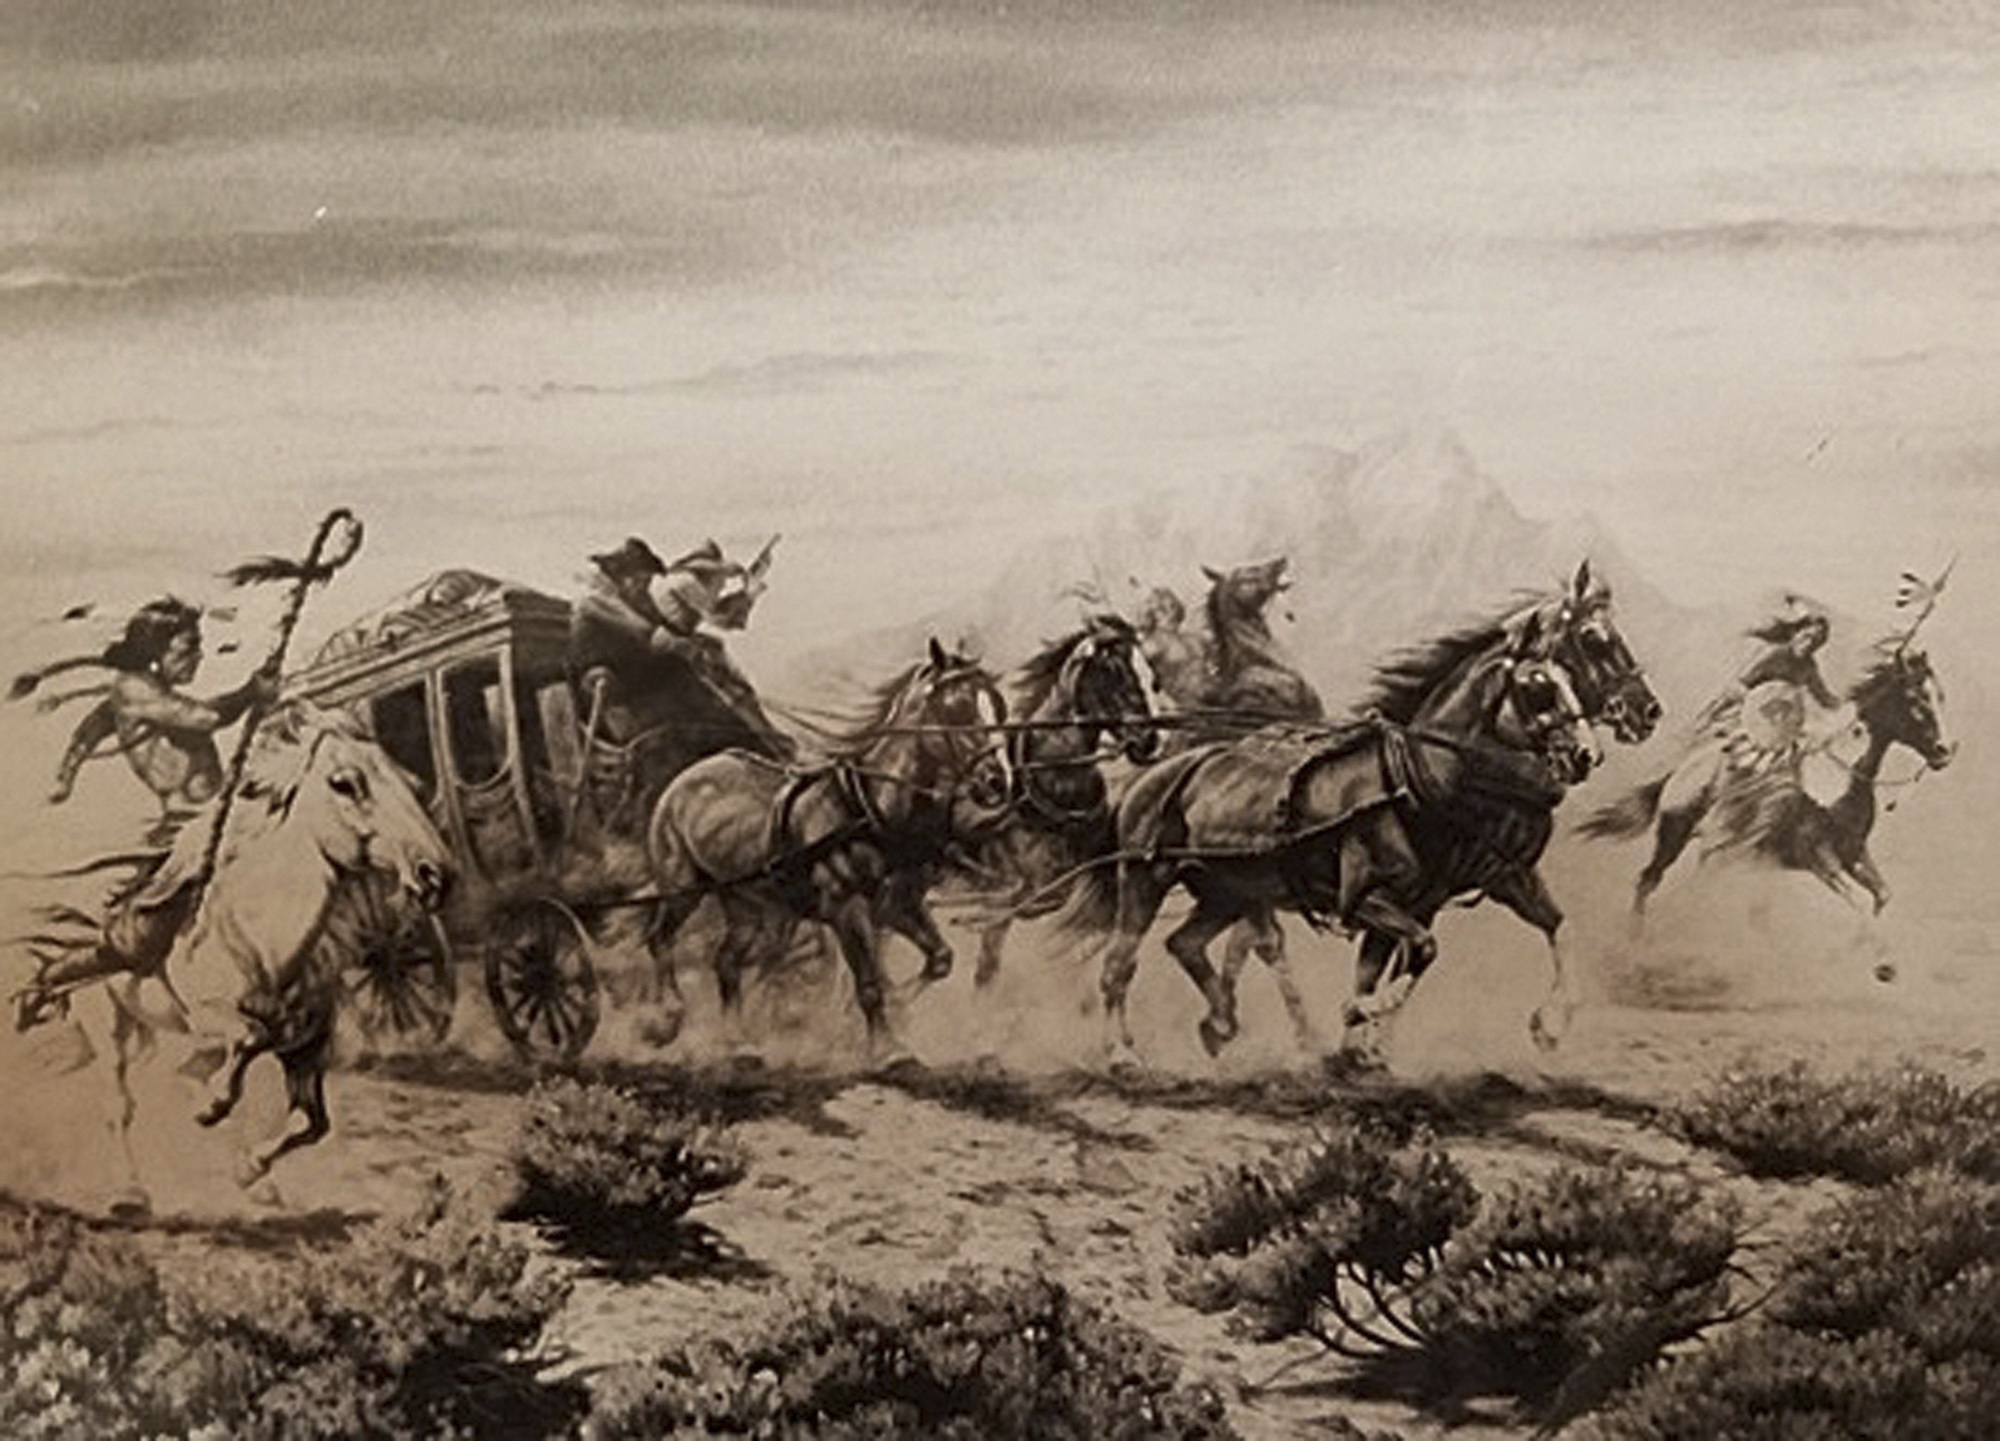 This artwork depicting a Western scene with a stage coach and Indians is among the items stolen from the Staten Island, N.Y., home of artist Gregory Perillo in 1983.